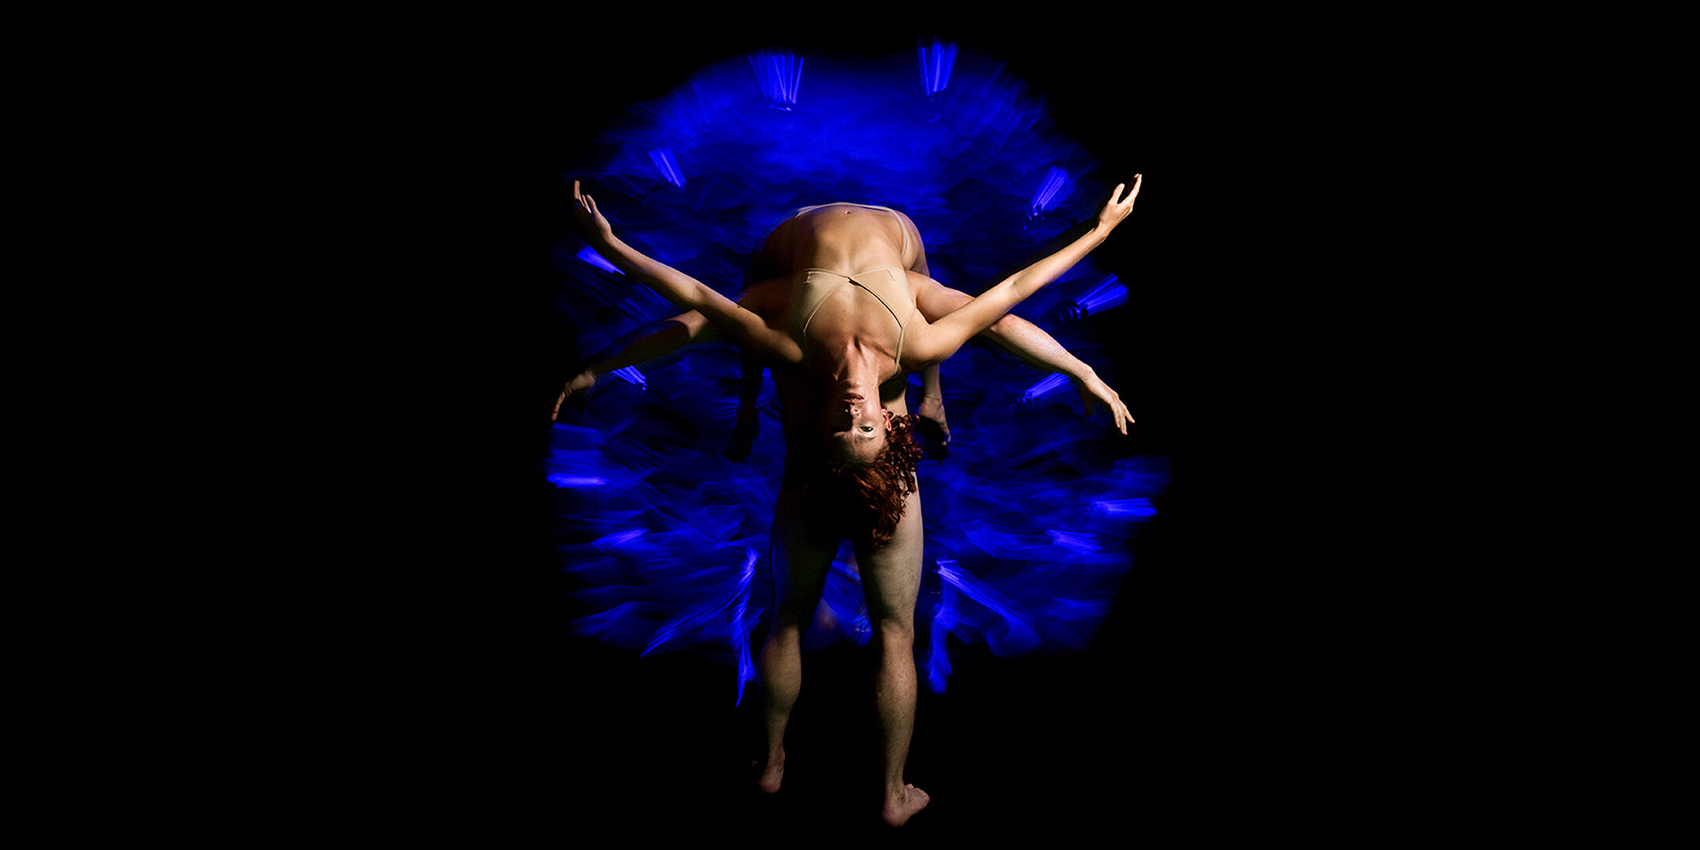 Two performers intertwined against a dark background